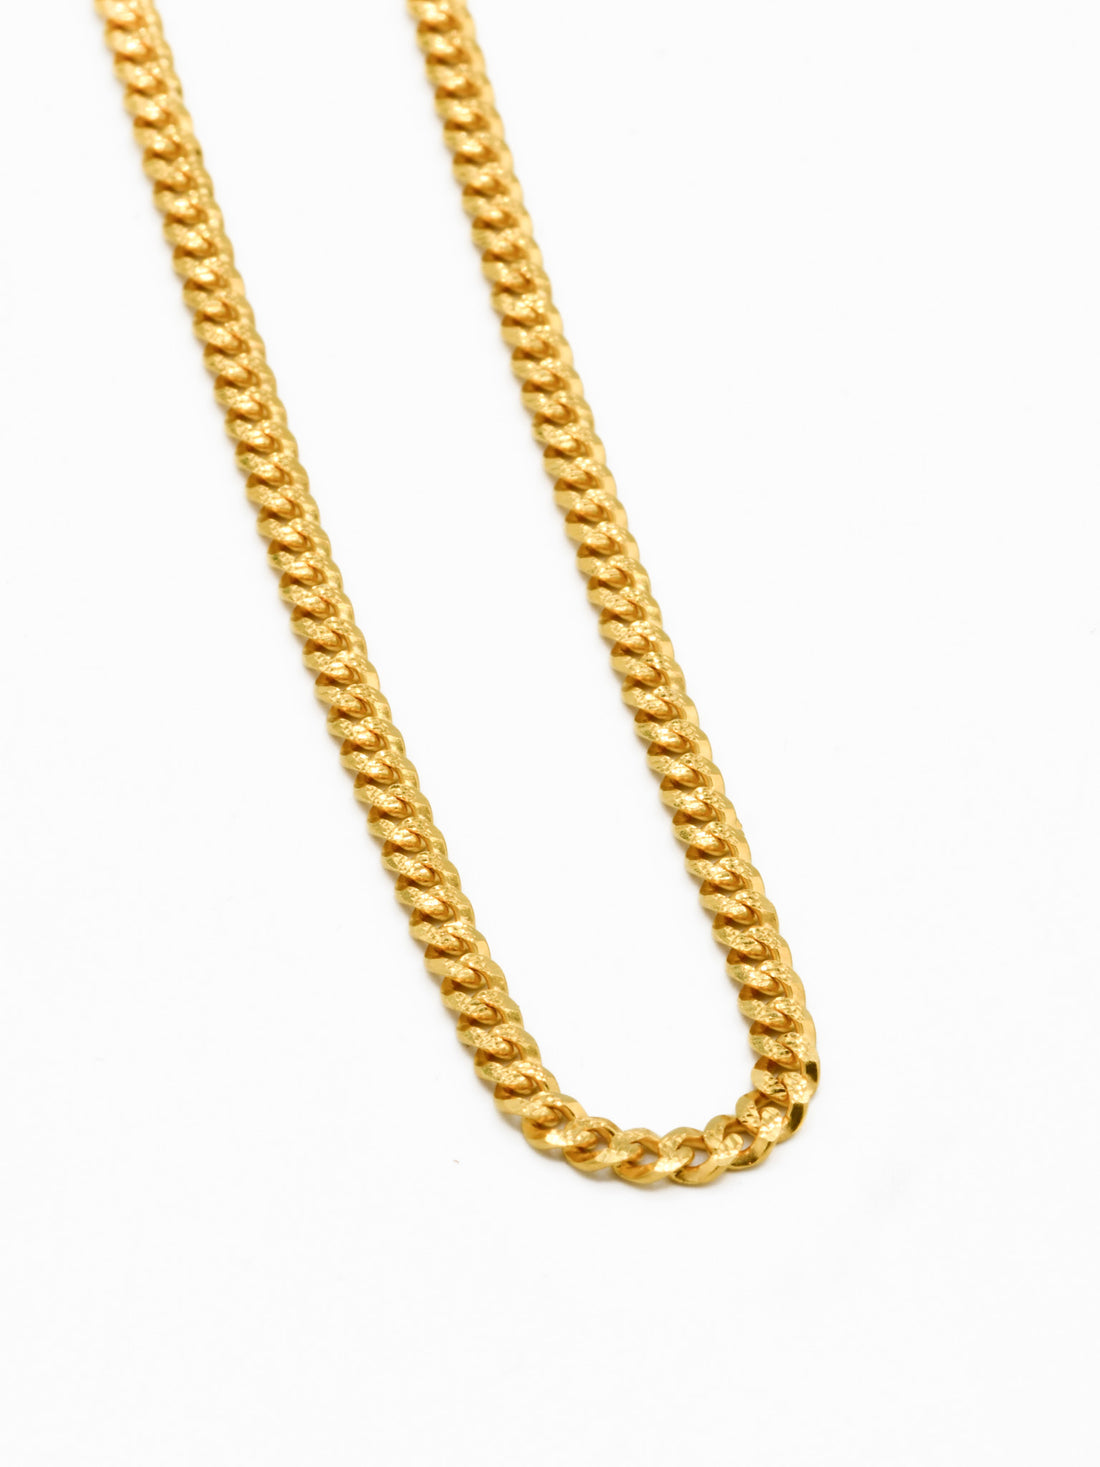 22ct Gold Curb Chain - Roop Darshan